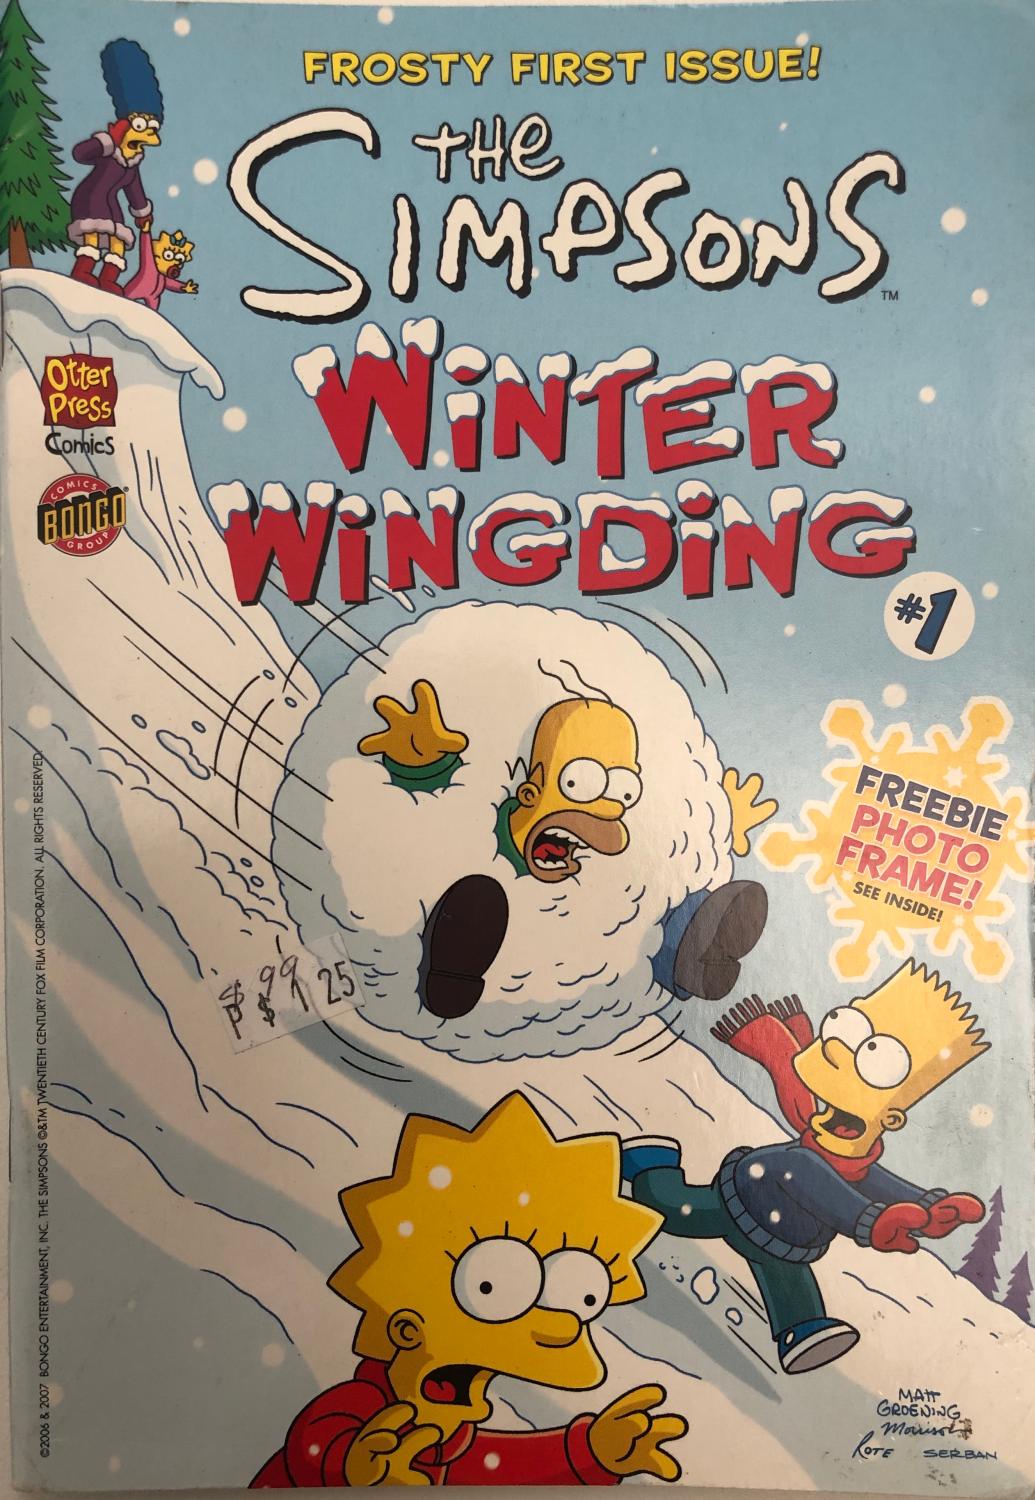 The simpsons winter